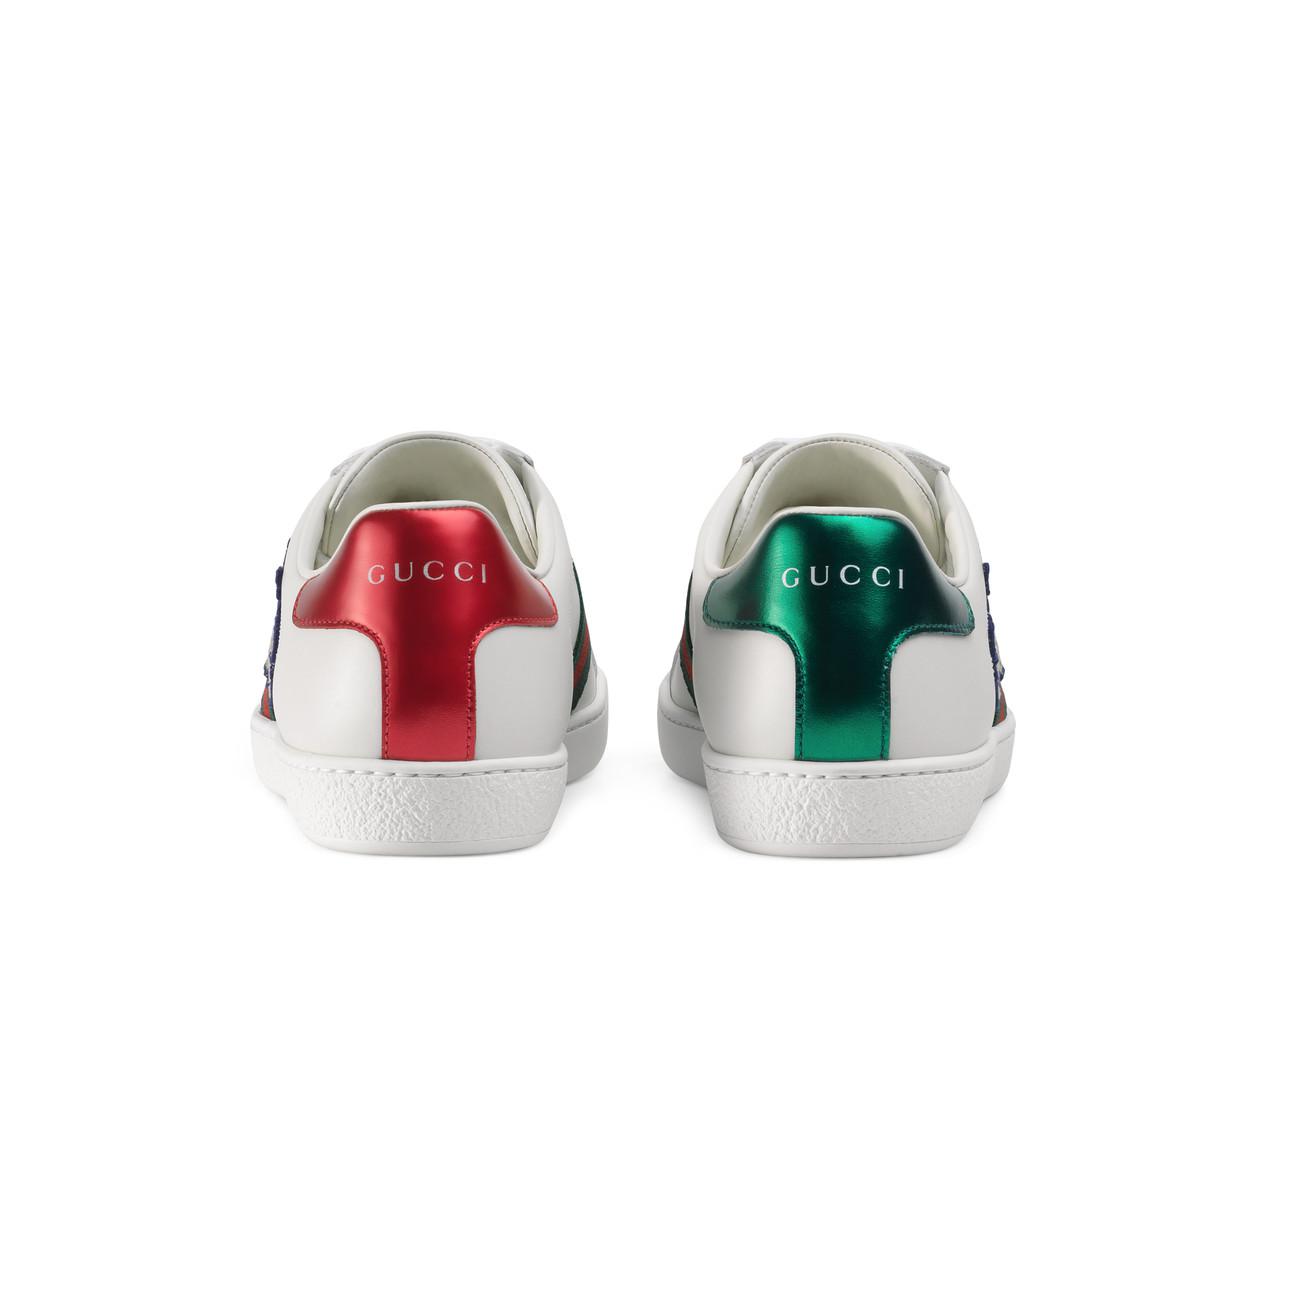 gucci three little pigs sneakers